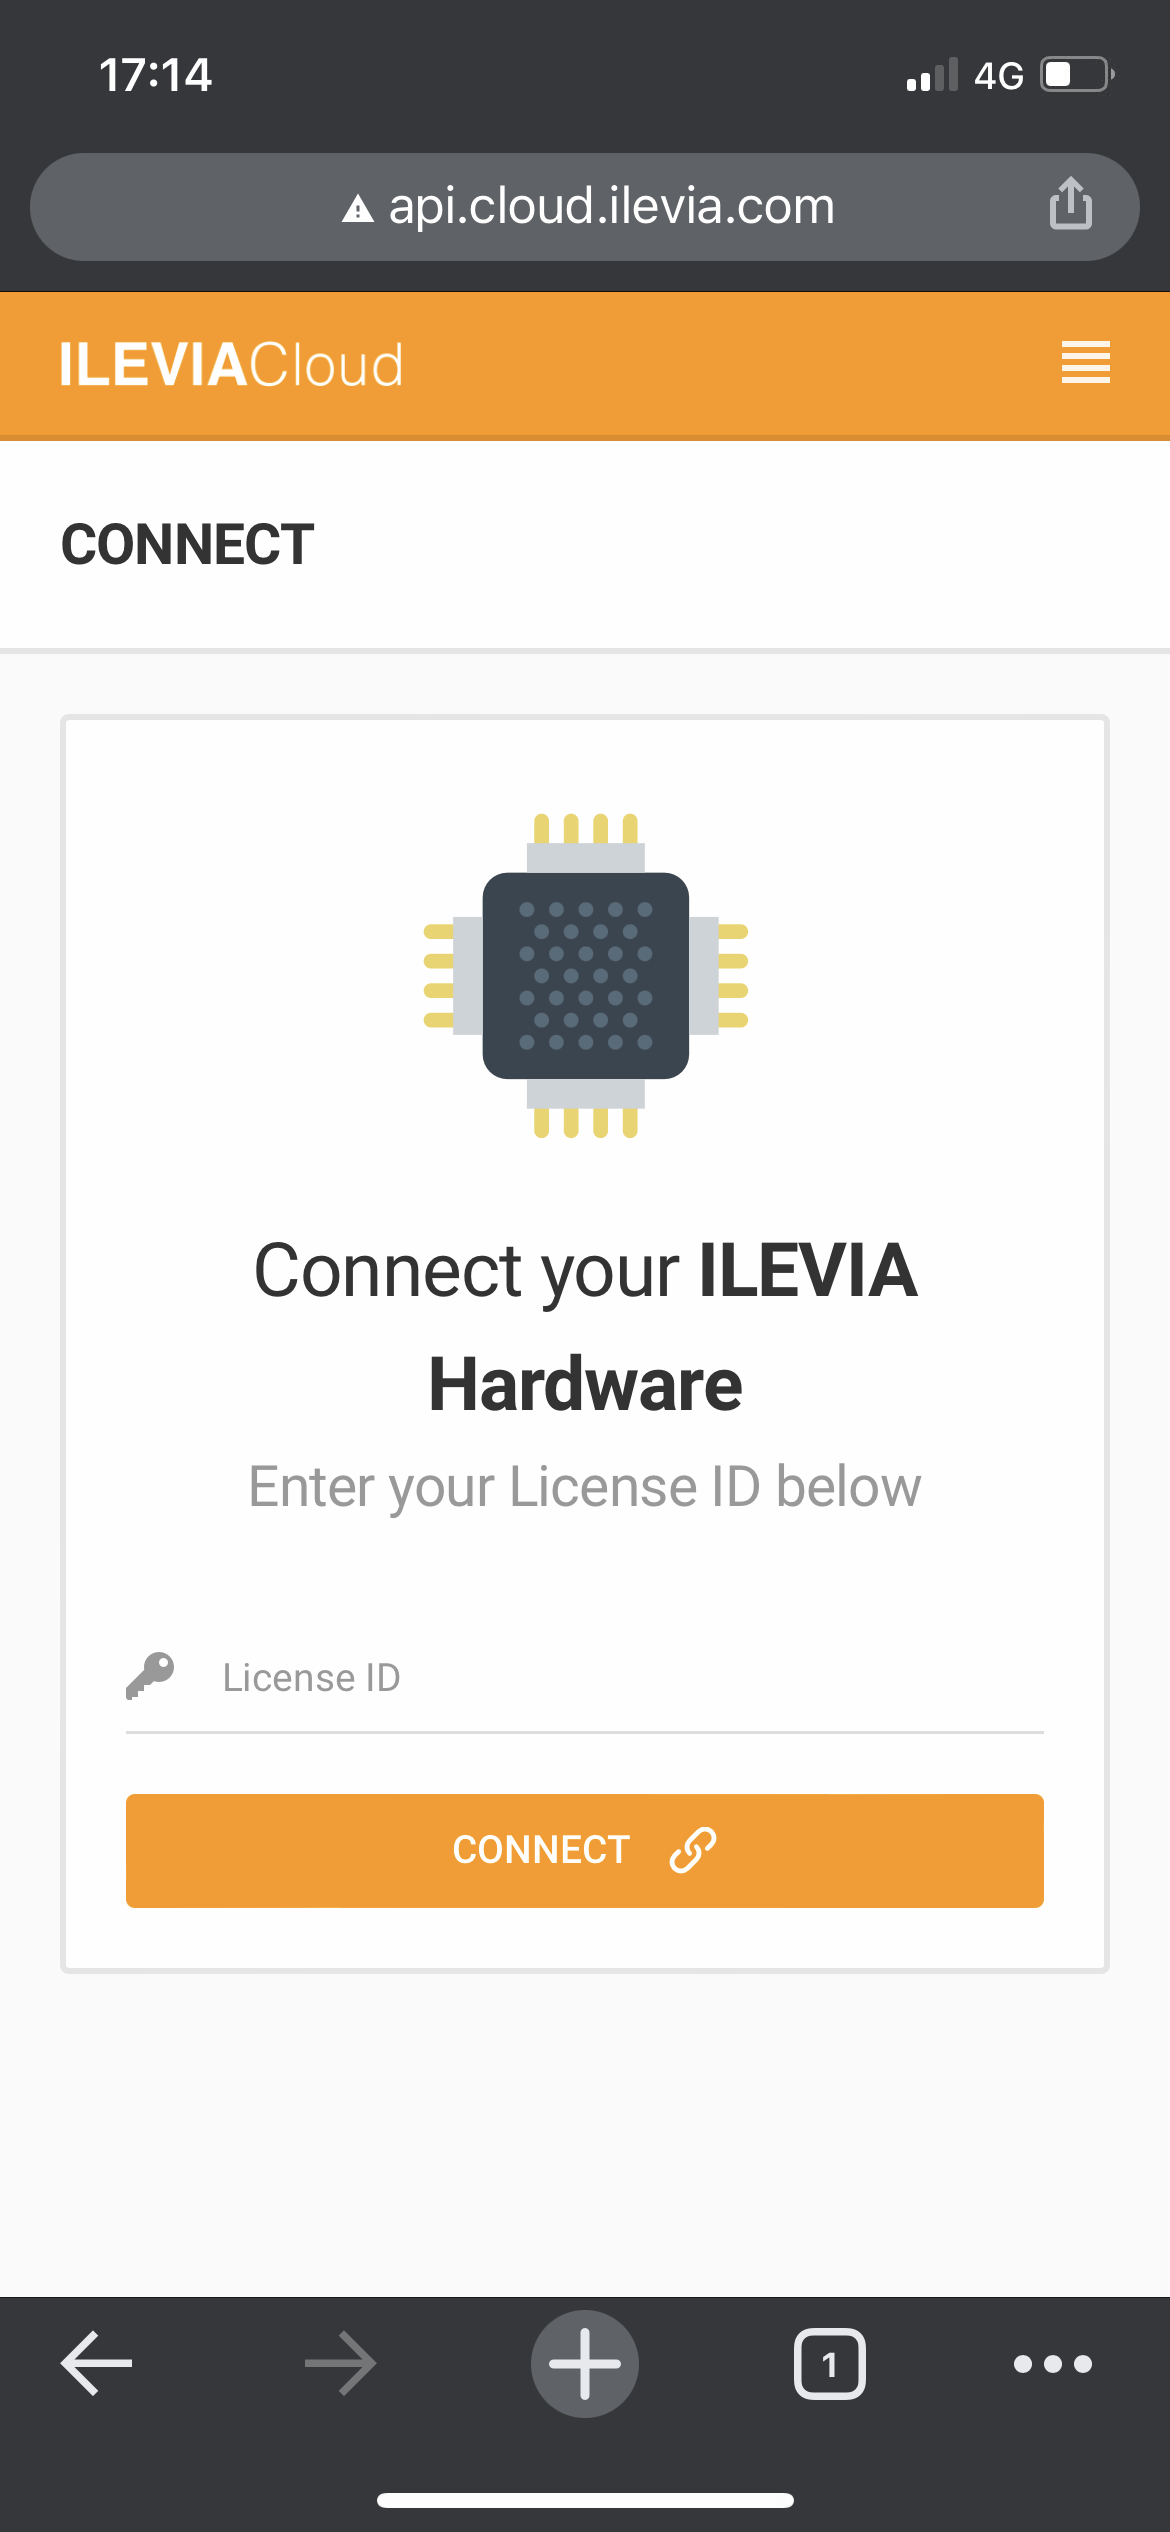 How to connect a new Ilevia server inside the Ilevia cloud | Inesrting the License ID